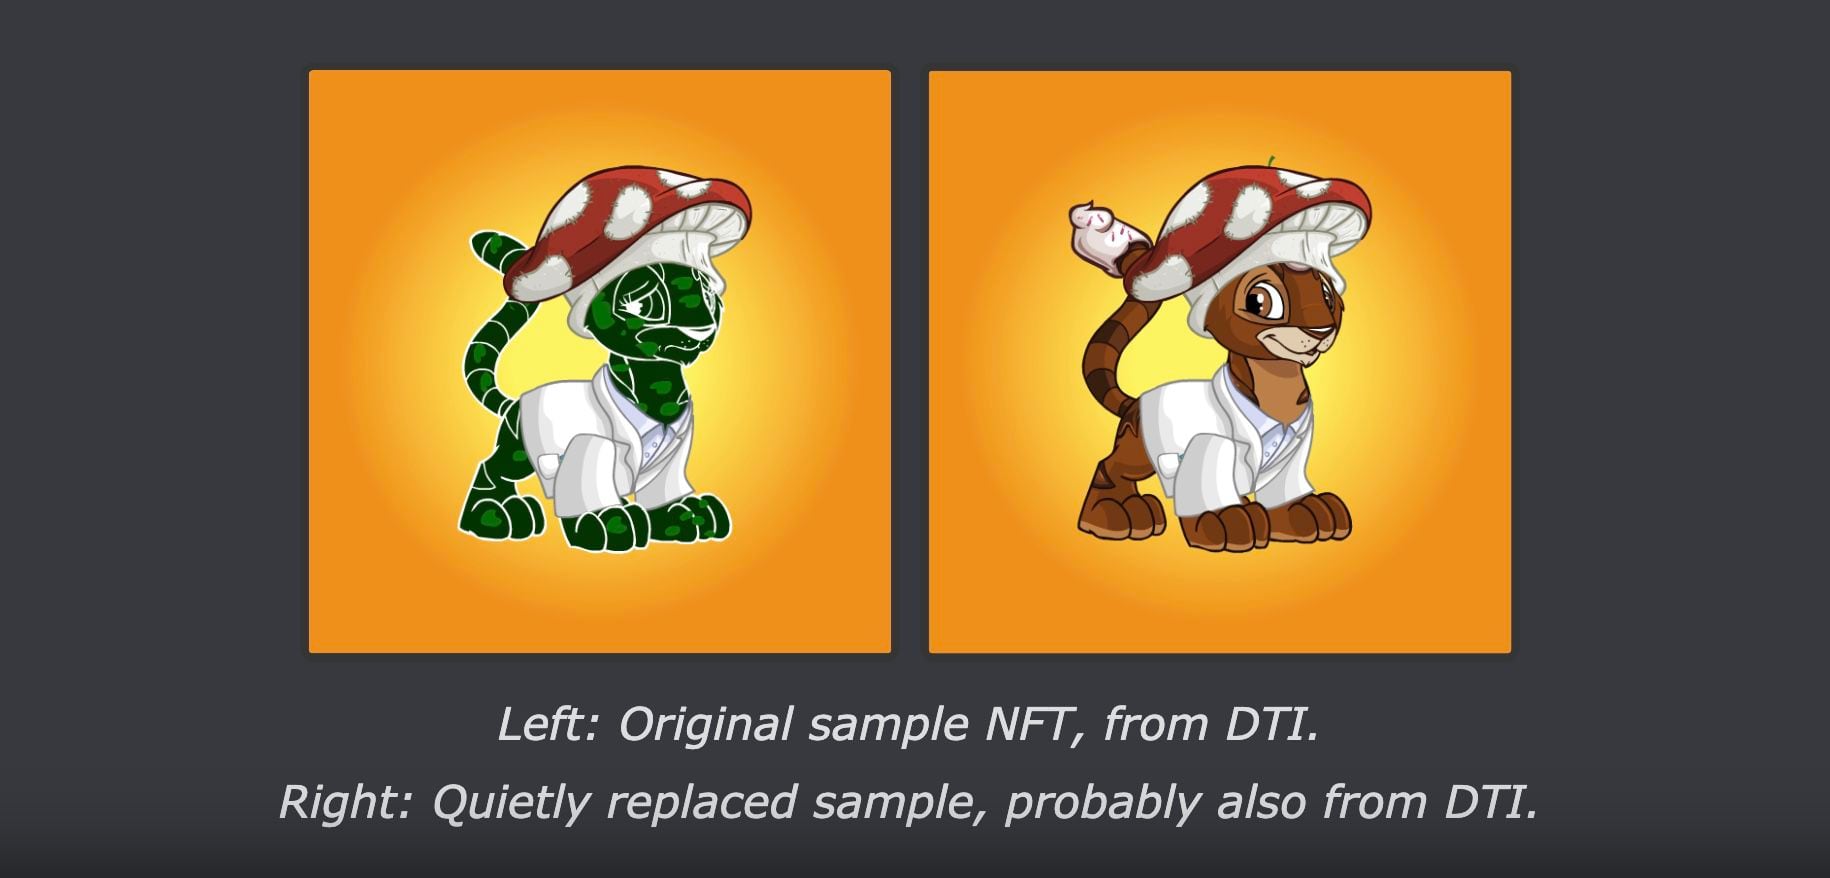 A screenshot from Neopets fansite Jellyneo, showing the sample NFT fans believe used art from a fan-made art generator without permission. (Jellyneo.net)